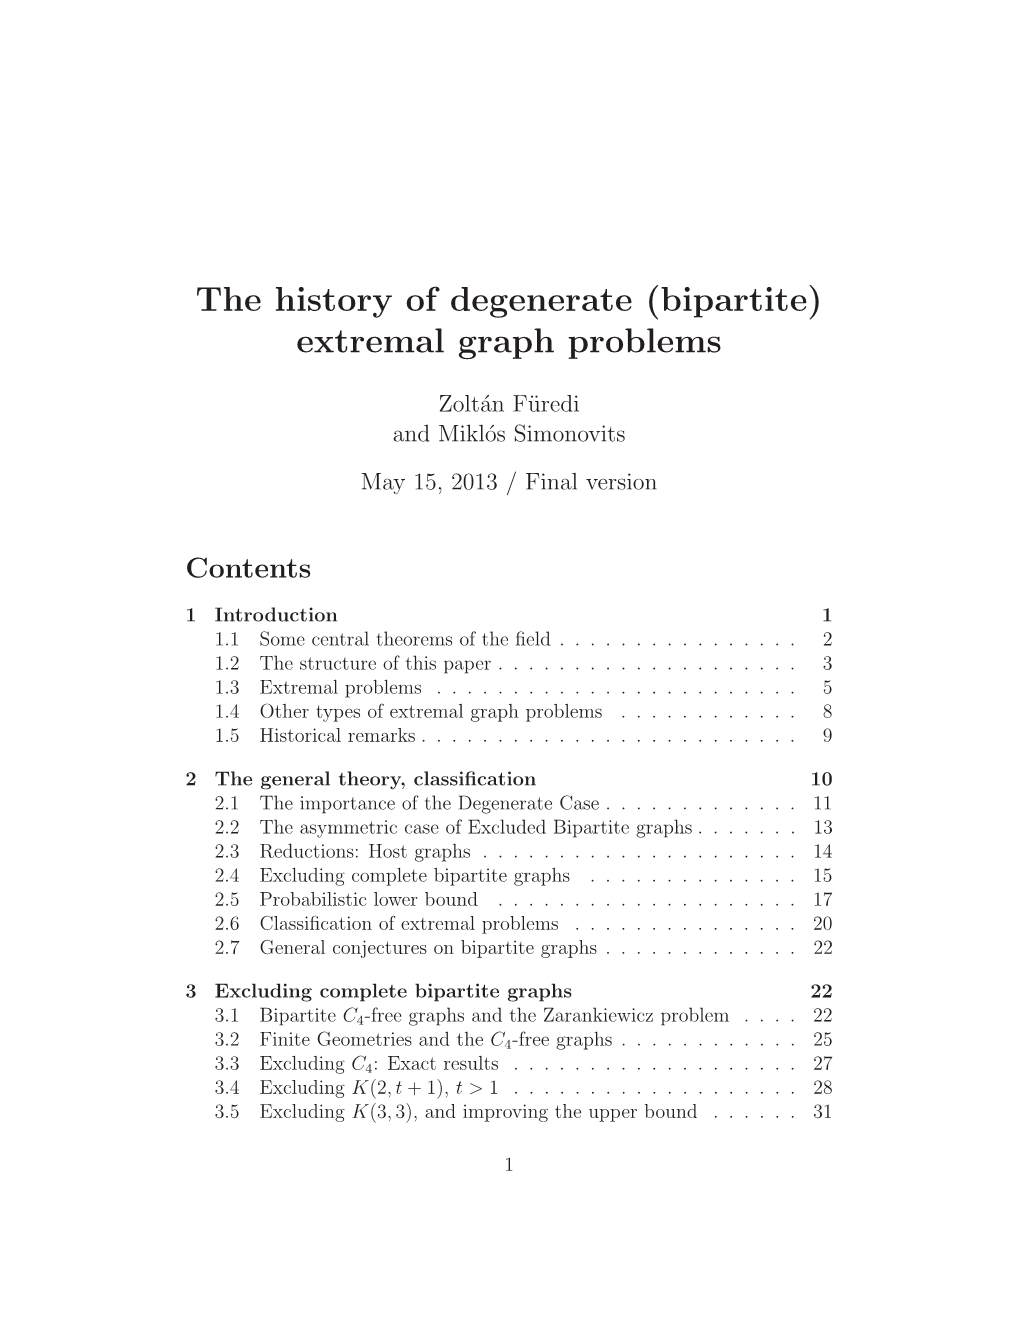 The History of Degenerate (Bipartite) Extremal Graph Problems